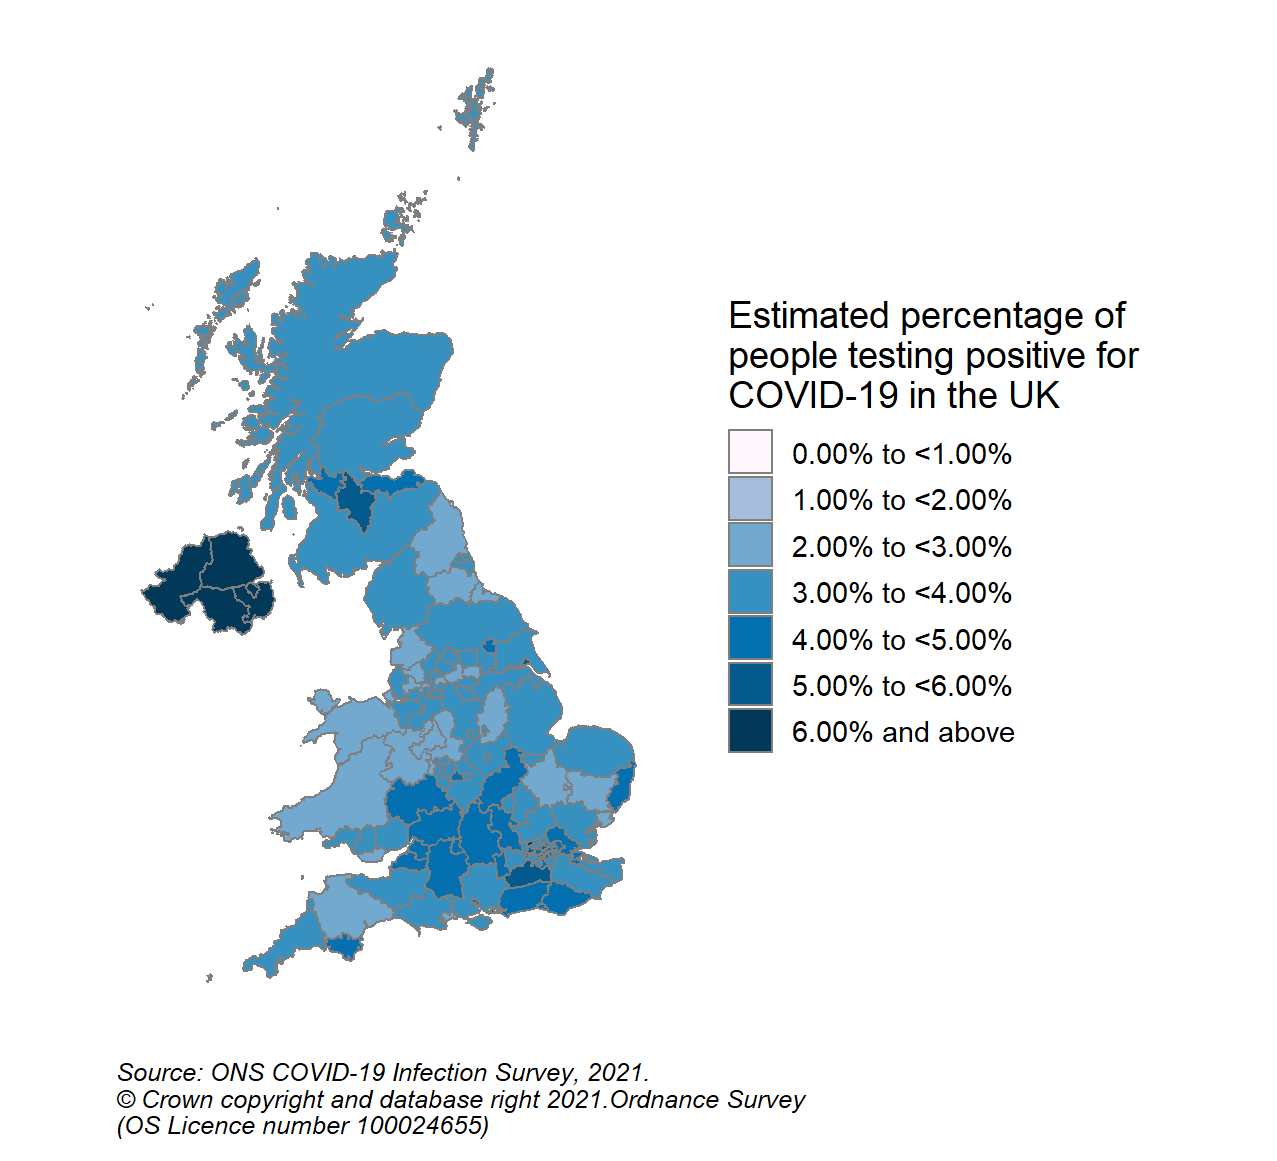 This colour coded map of the UK shows the modelled estimates of the percentage of the private residential population testing positive for COVID-19, by COVID-19 Infection Survey sub-regions. In Scotland, these sub-regions are comprised of Health Boards. The regions are: 123 - NHS Grampian, NHS Highland, NHS Orkney, NHS Shetland and NHS Western Isles, 124 - NHS Fife, NHS Forth Valley and NHS Tayside, 125 - NHS Greater Glasgow & Clyde, 126 - NHS Lothian, 127 - NHS Lanarkshire, 128 - NHS Ayrshire & Arran, NHS Borders and NHS Dumfries & Galloway.  The sub-region with the highest modelled estimate for the percentage of people testing positive was CIS Region 127 (NHS Lanarkshire) at 5.12% (95% credible interval: 4.12% to 6.35%).  The sub-region with the lowest modelled estimate was Region 128 (NHS Ayrshire & Arran, NHS Borders and NHS Dumfries & Galloway), at 3.22% (95% credible interval: 2.55% to 4.10%).